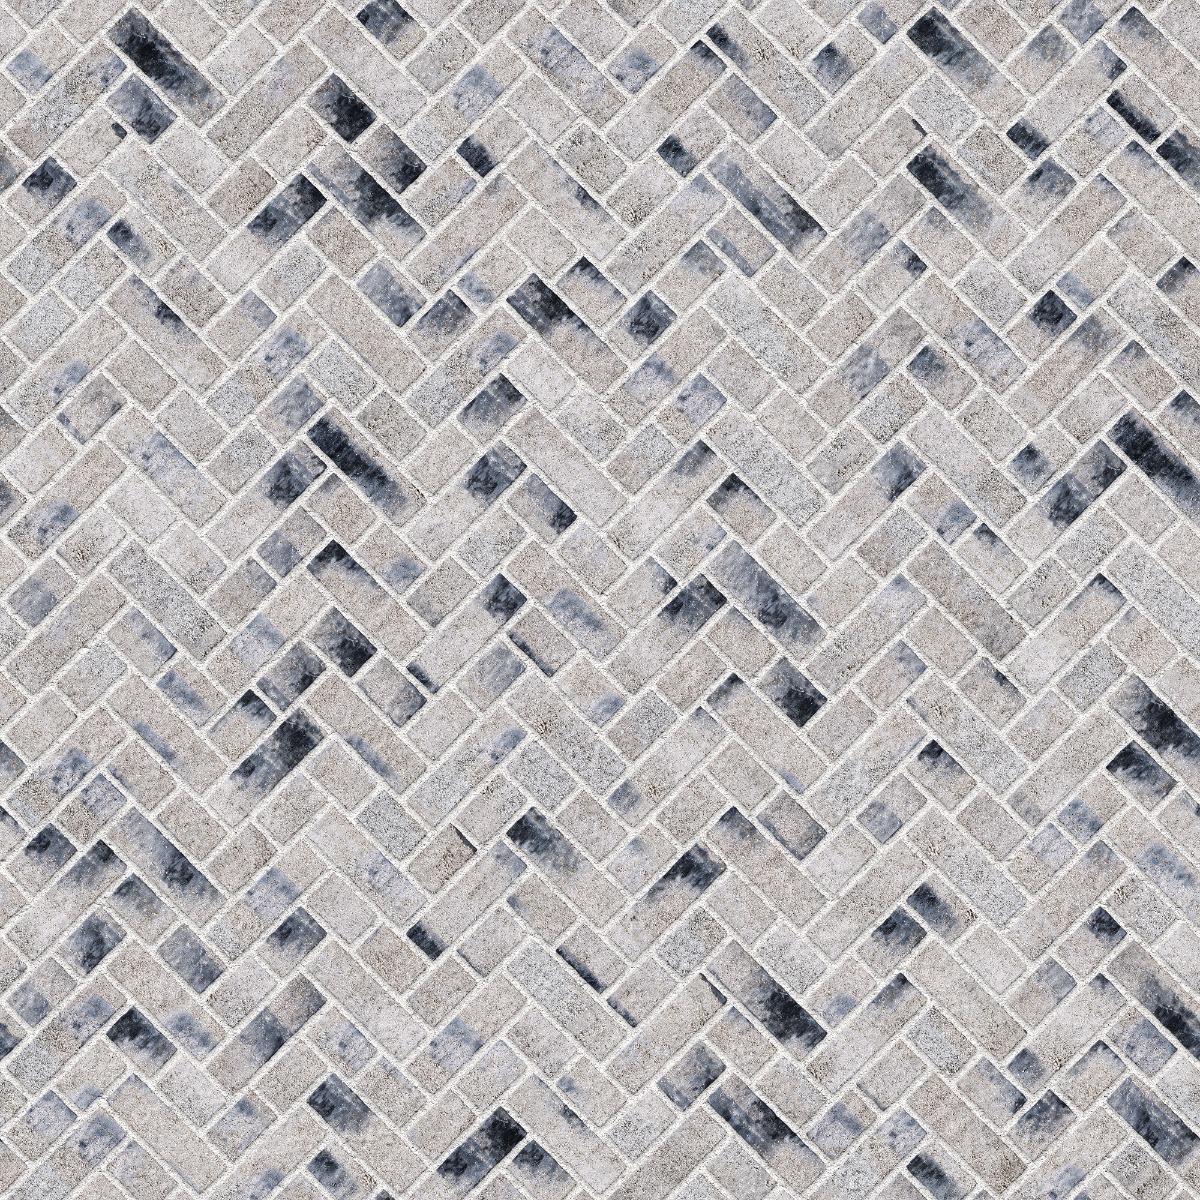 A seamless brick texture with charcoal brick units arranged in a Broken Herringbone pattern